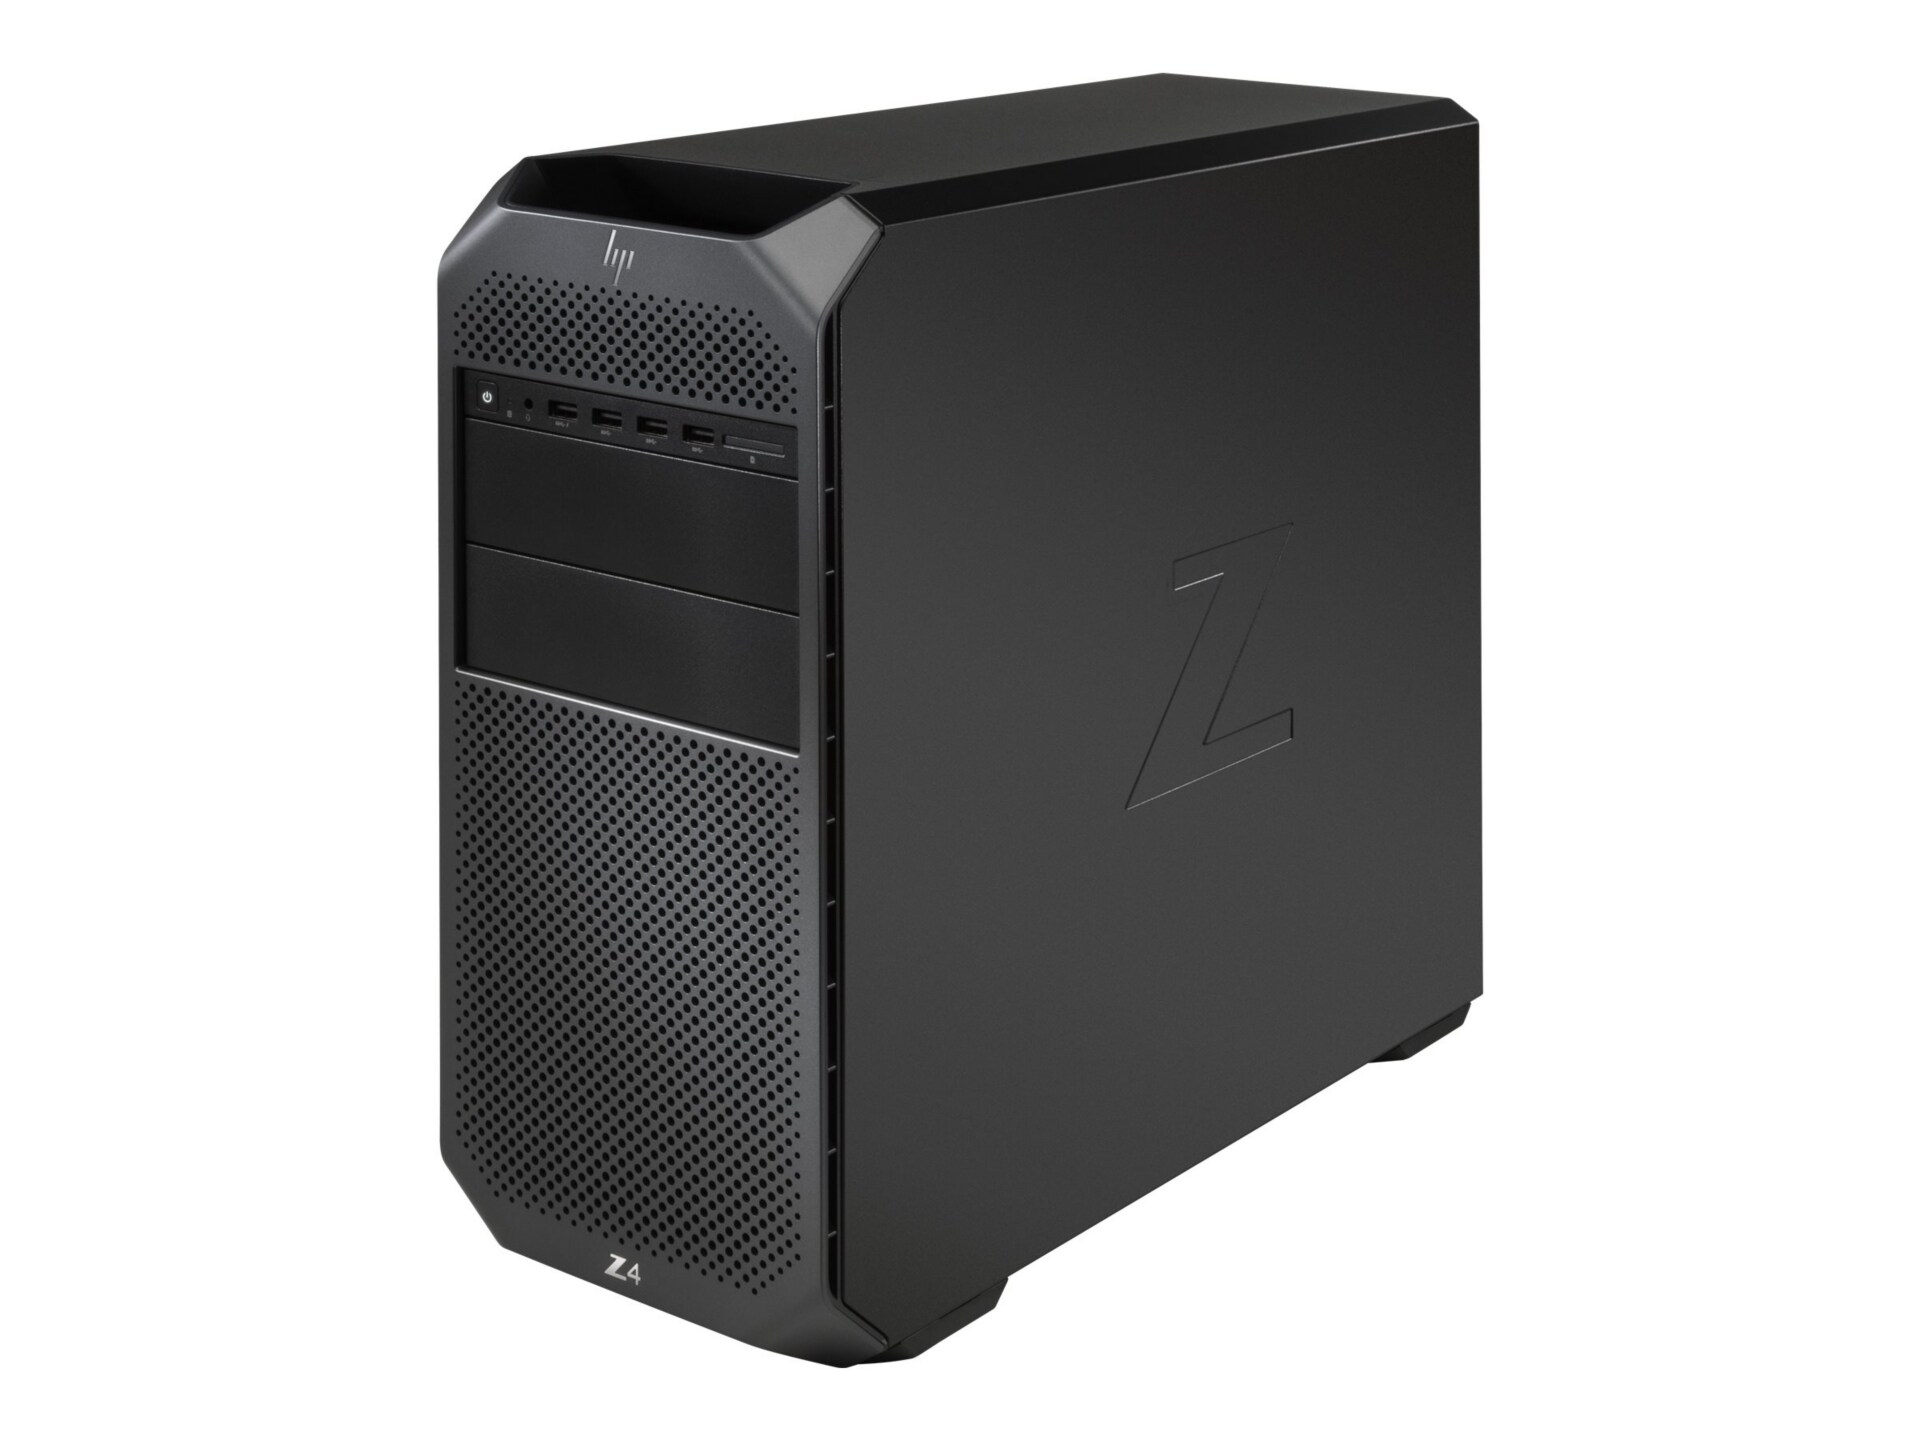 HP Workstation Z4 G4 - Wolf Pro Security - MT - Core i9 10900X X-series 3.7 GHz - 16 GB - SSD 512 GB - US - with HP Wolf